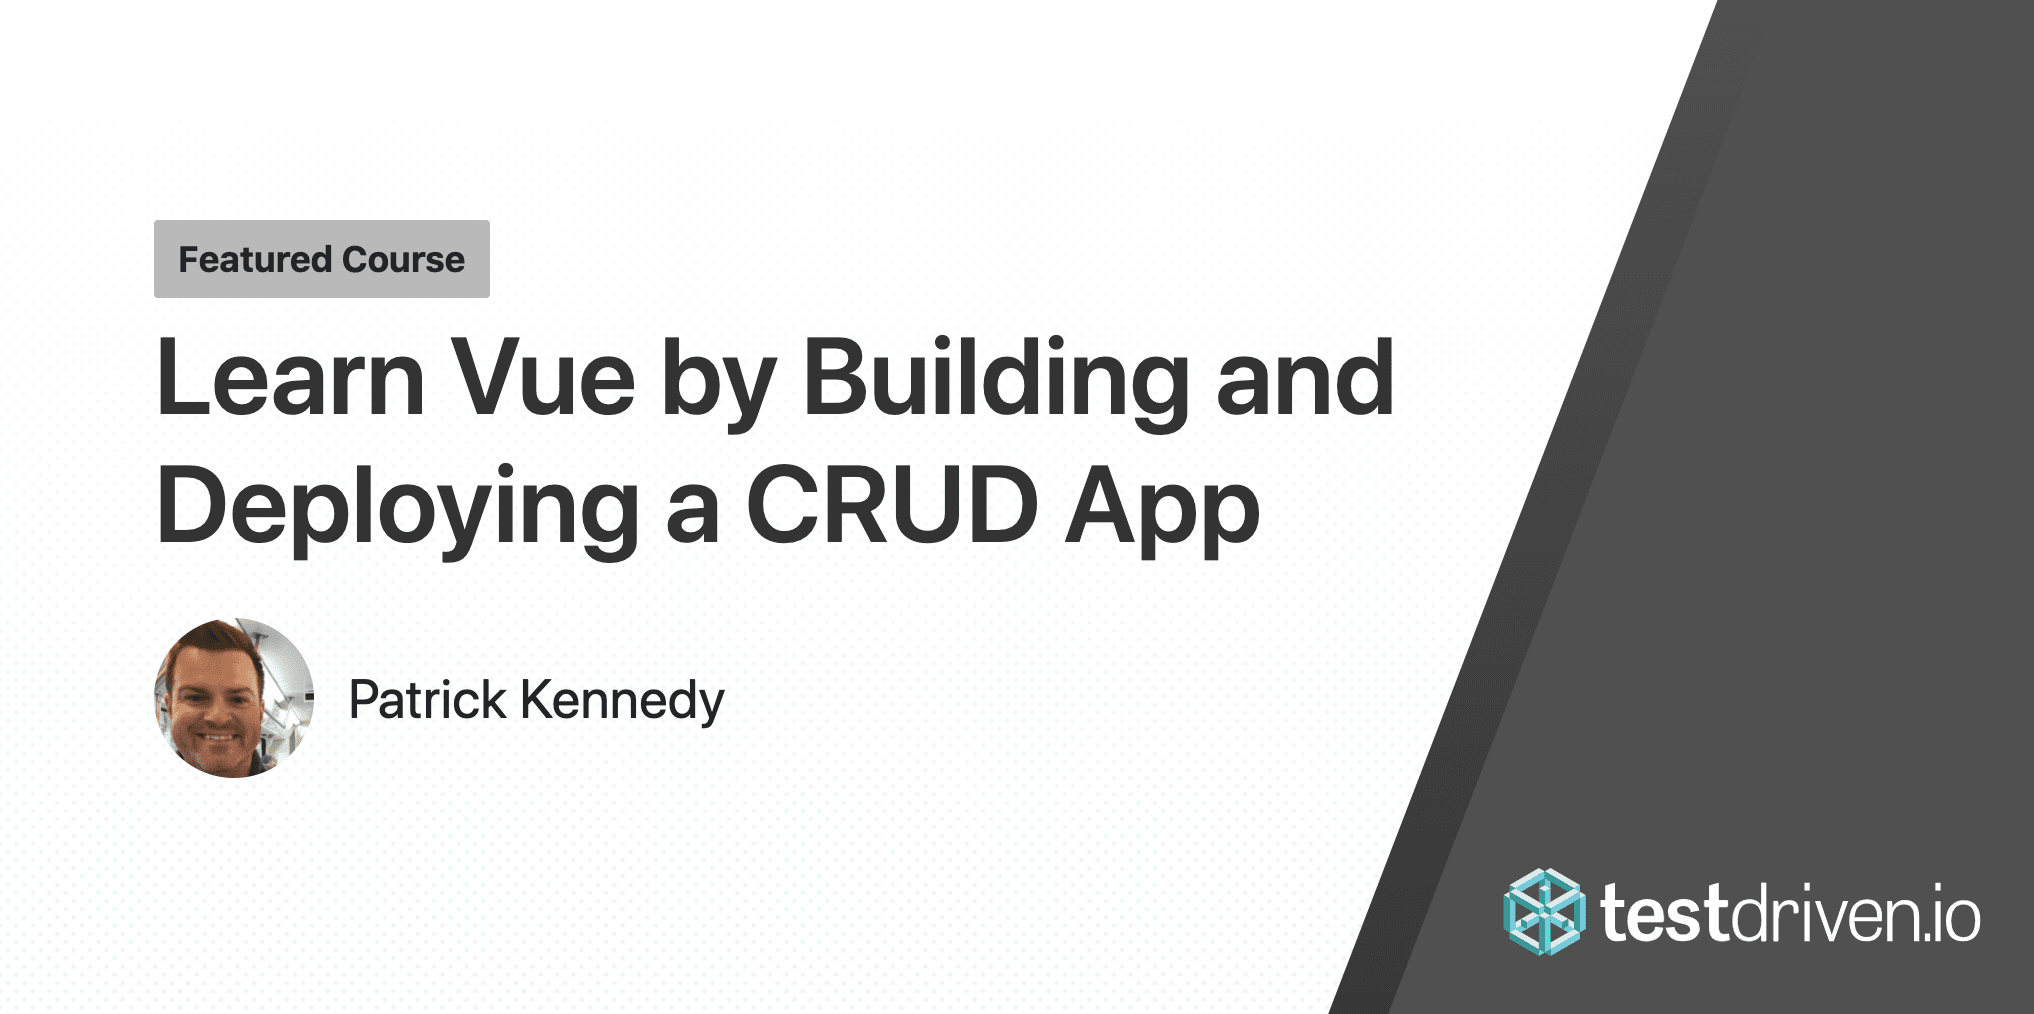 Learn Vue by Building and Deploying a CRUD App - Social Card